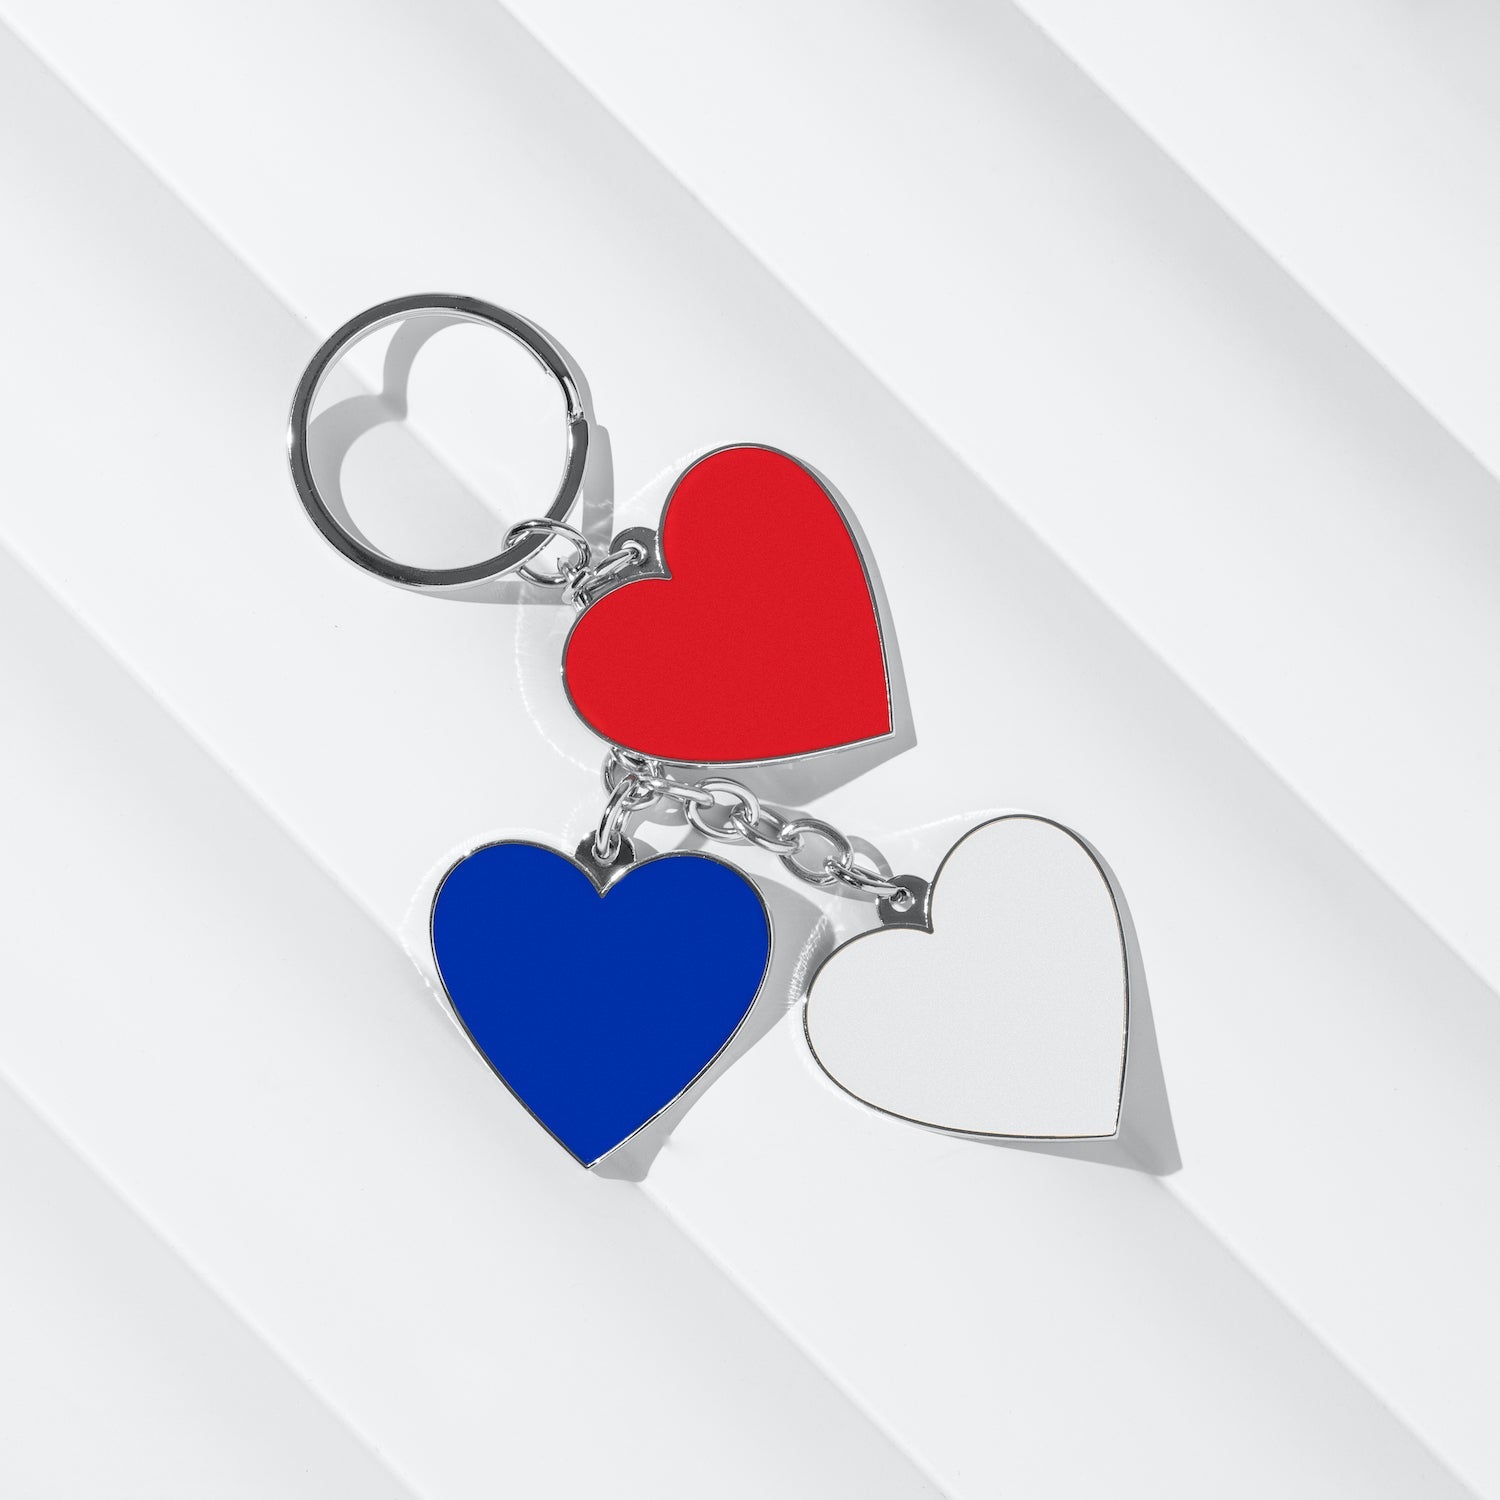 American Dream Keychain - Lusanet Collective